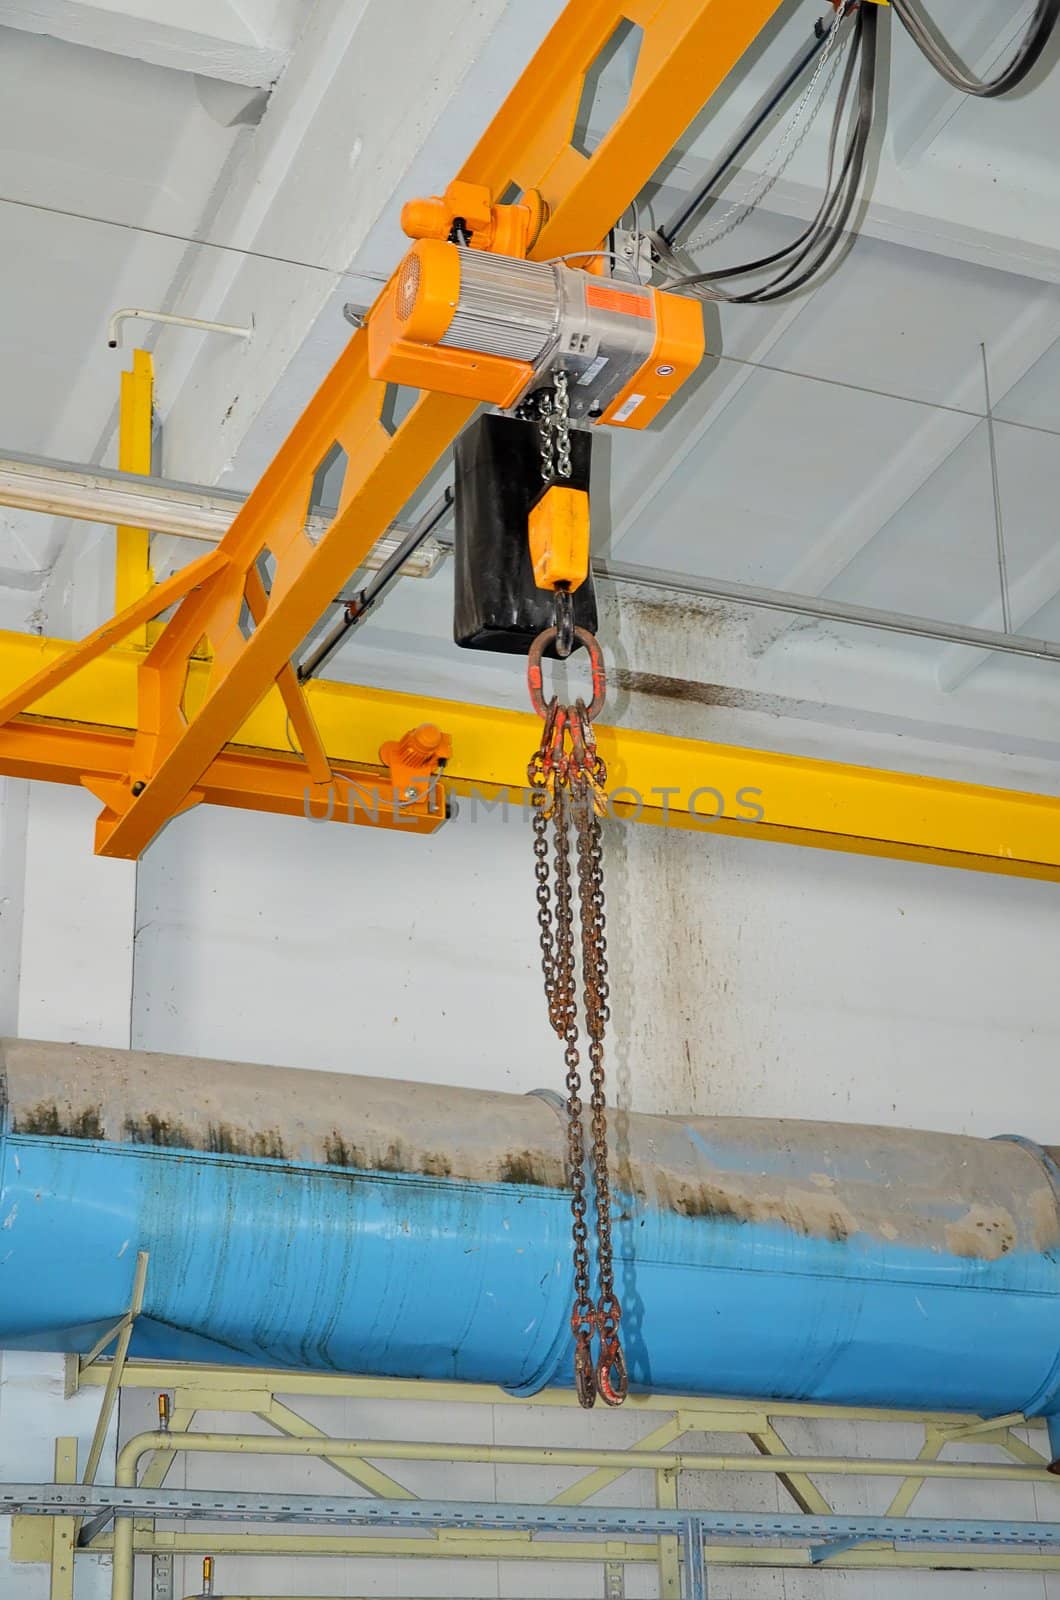 Automatic industrial crane at the plant